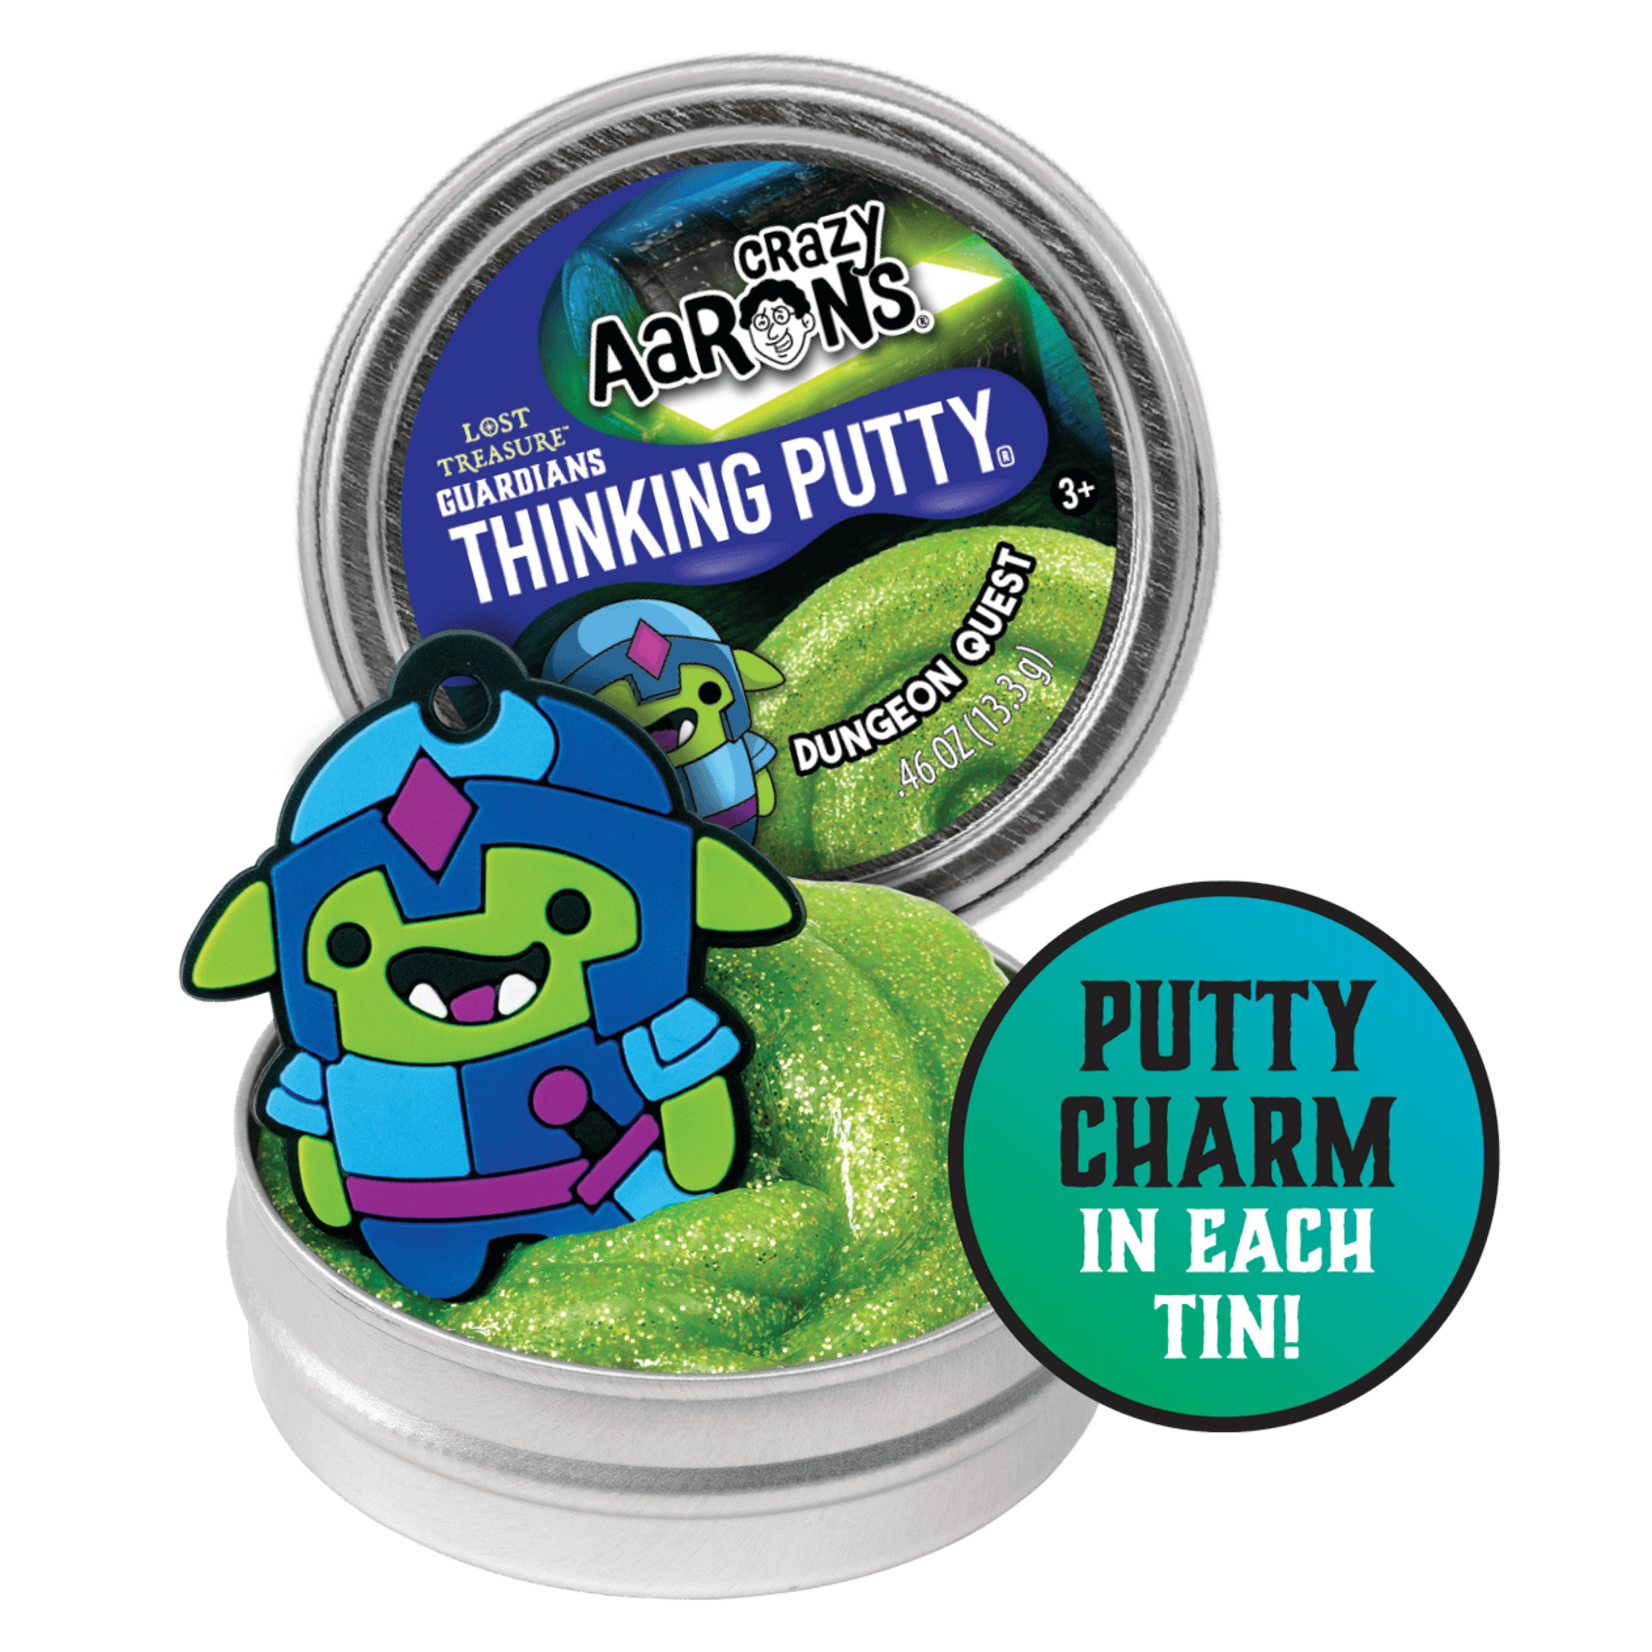 Crazy Aaron's Thinking Putty Lost Treasure Guardians